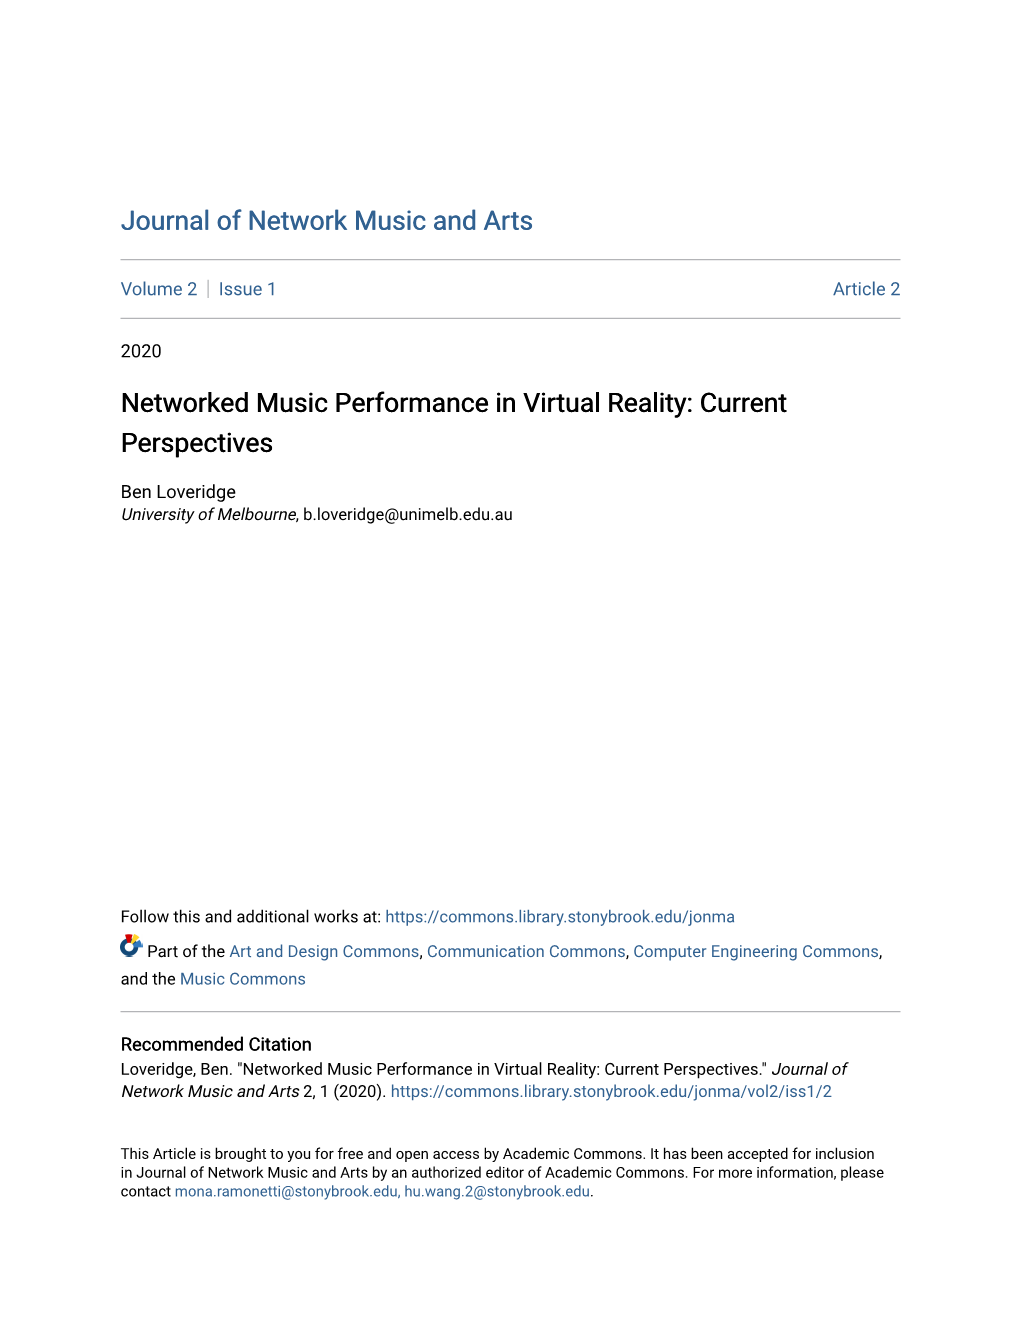 Networked Music Performance in Virtual Reality: Current Perspectives